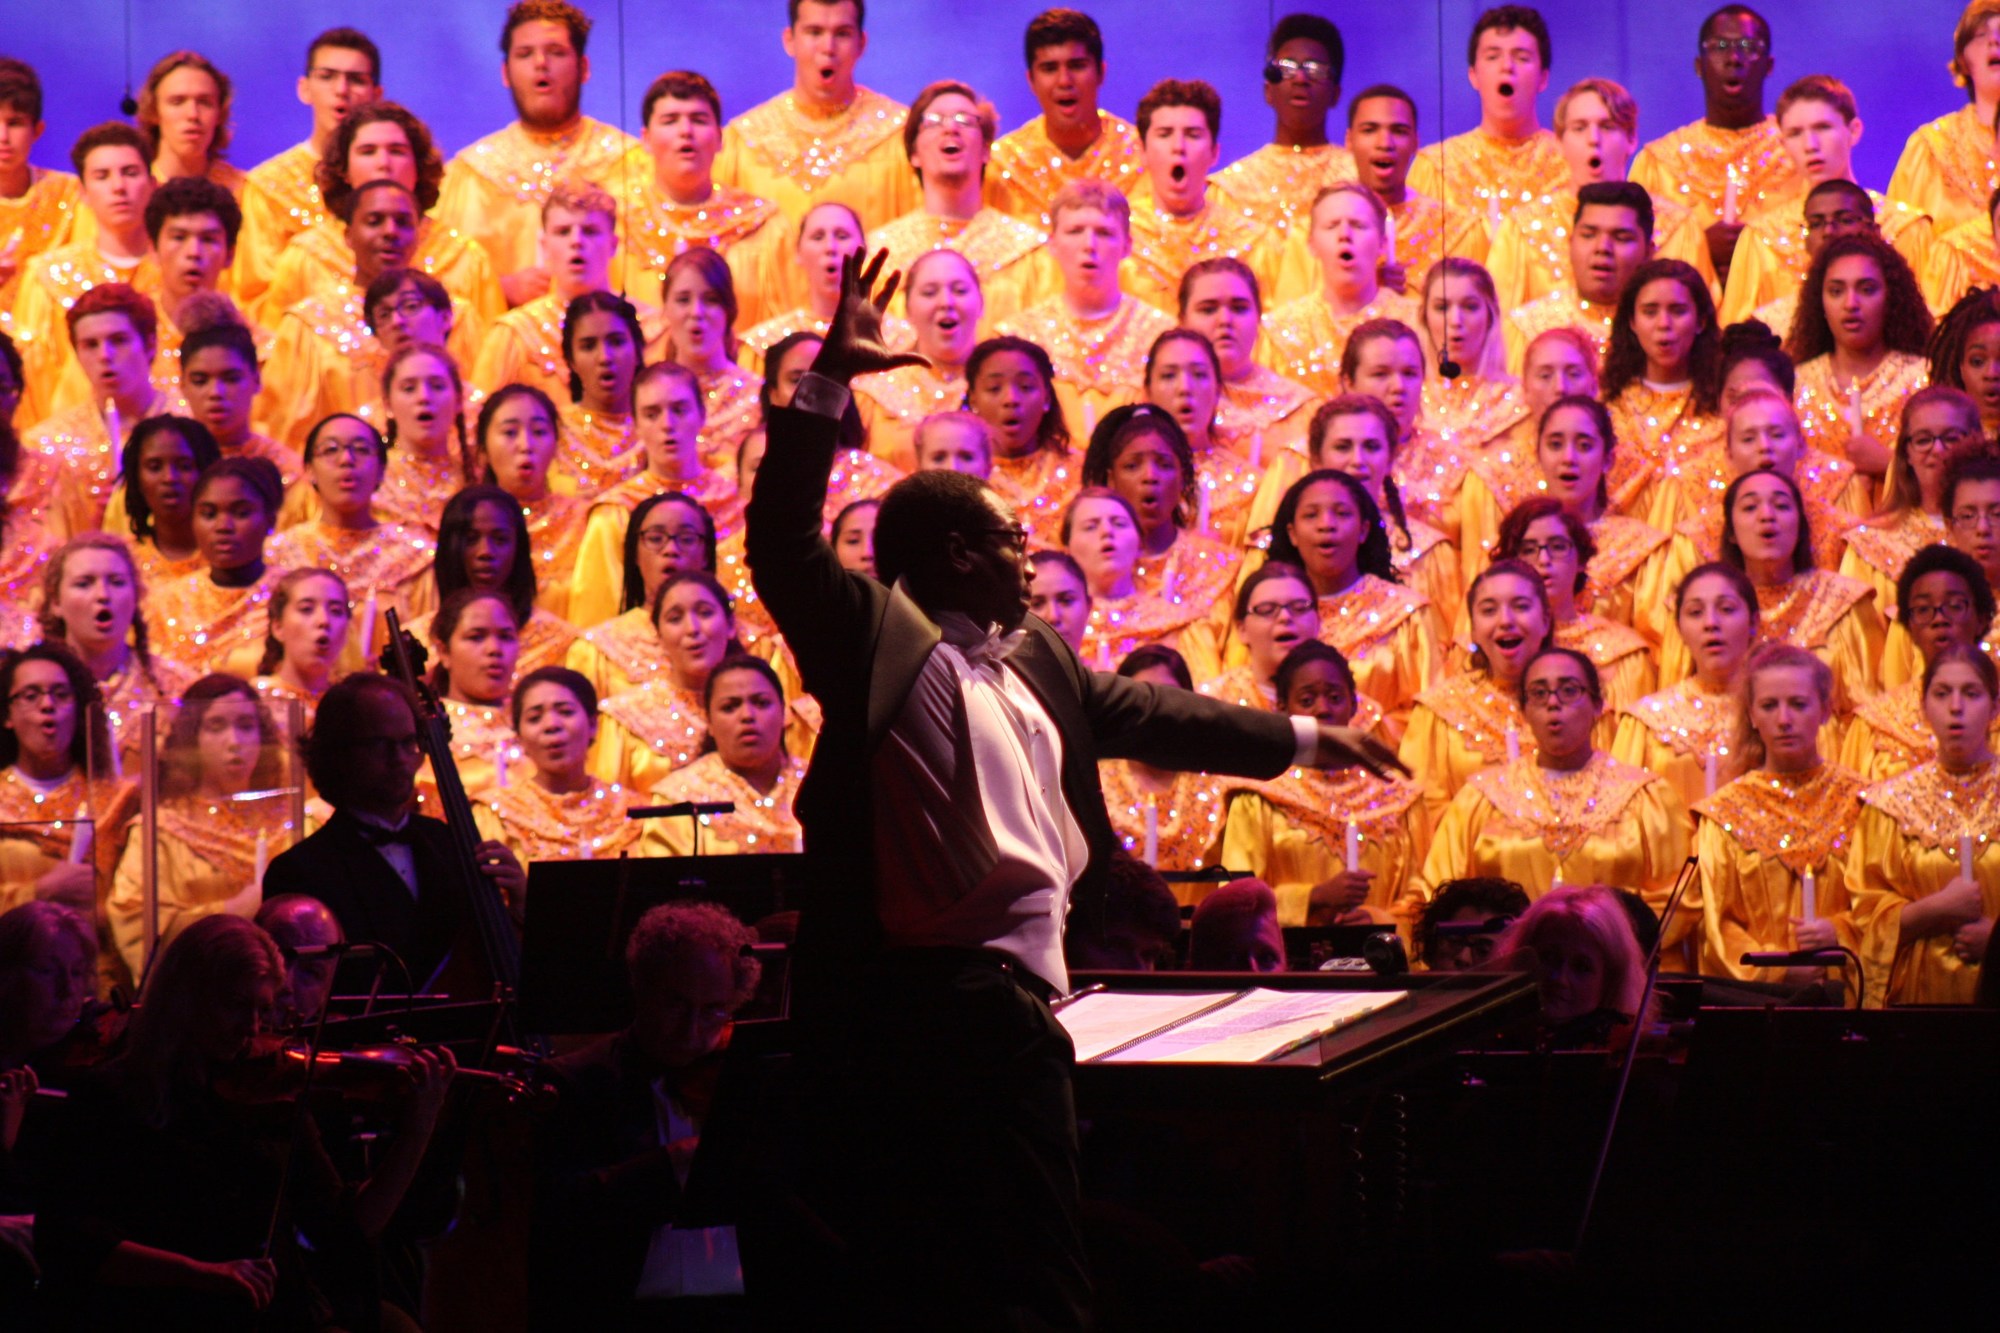 Dr. Redding was invited multiple times to conduct Epcot's Candlelight Processional program.